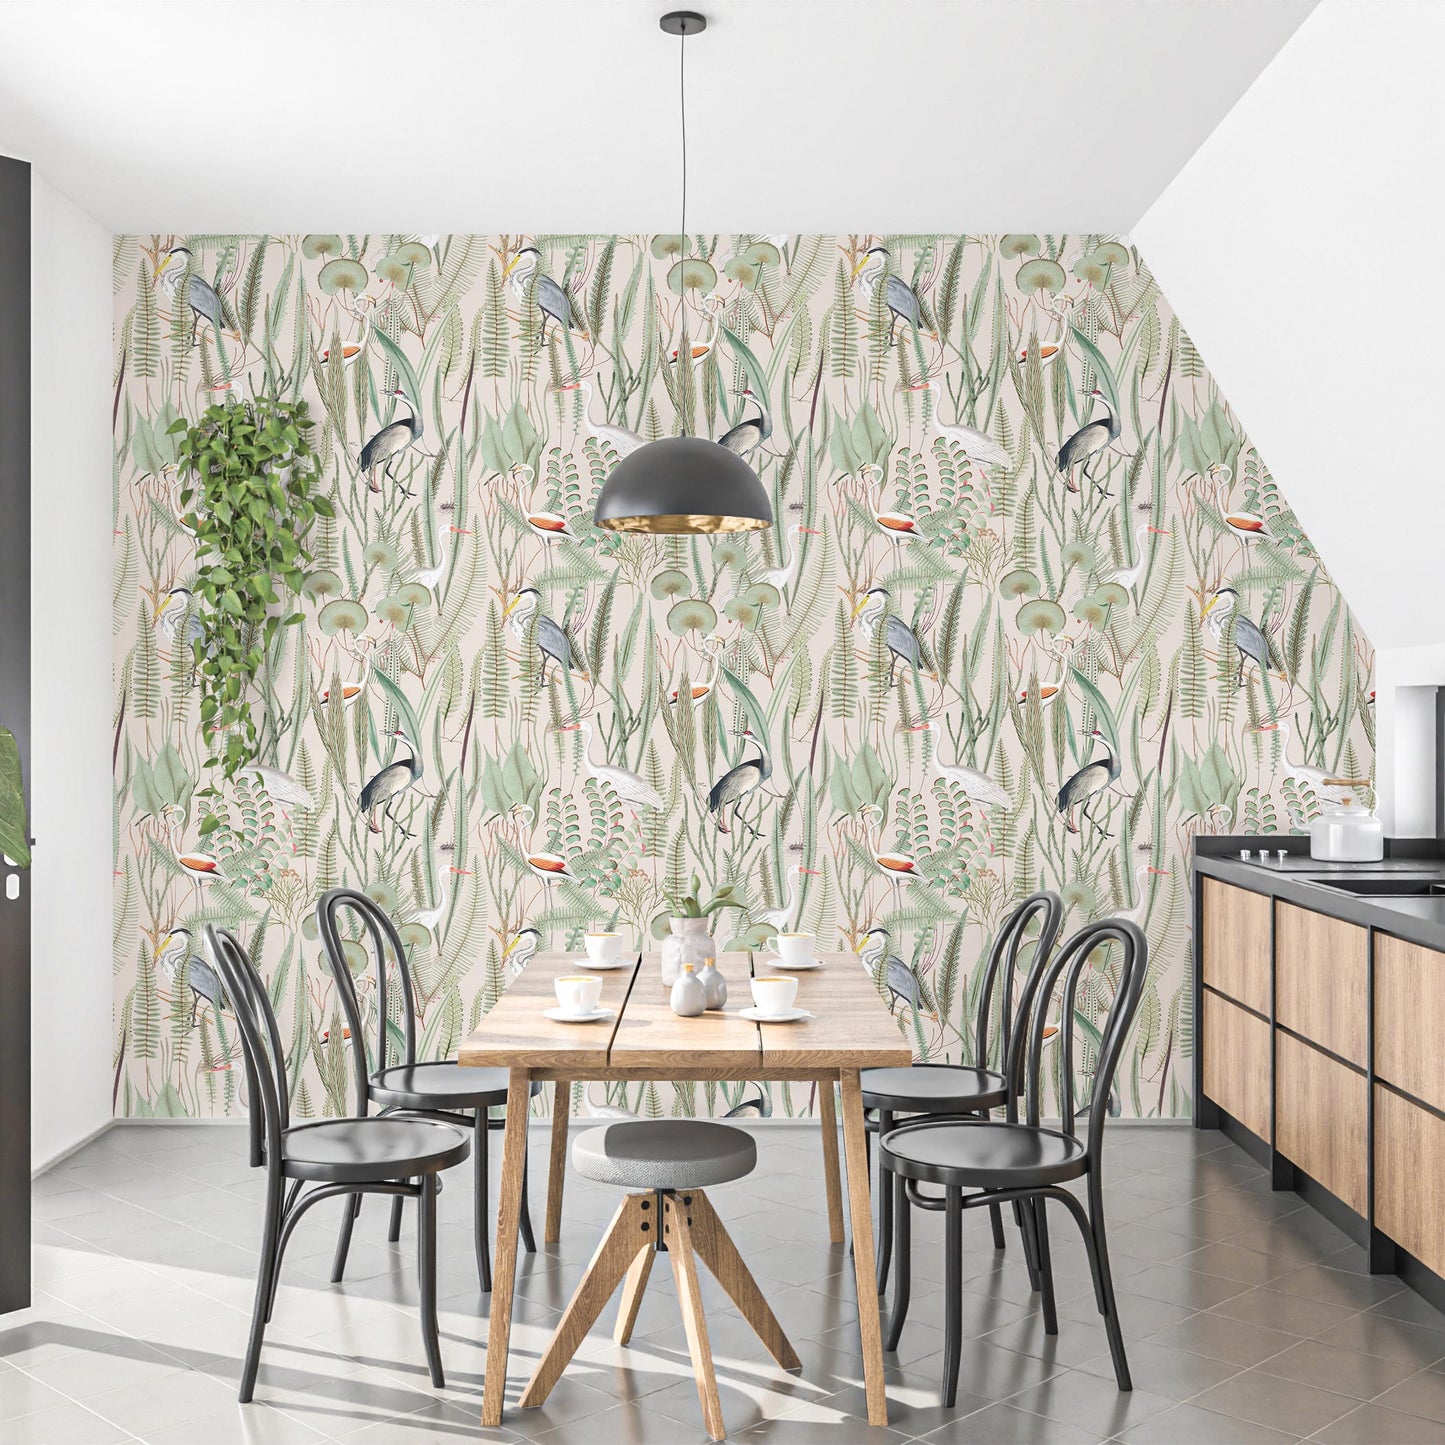 Infuse your kitchen with a touch of nature's elegance with our captivating pink botanical crane peel-and-stick accent wallpaper. This statement piece features graceful herons amidst a vibrant floral tapestry, adding a touch of sophistication to your minimalist kitchen. Pair the wallpaper with sleek wooden cabinets and black accents, creating a harmonious balance between natural beauty and modern design.